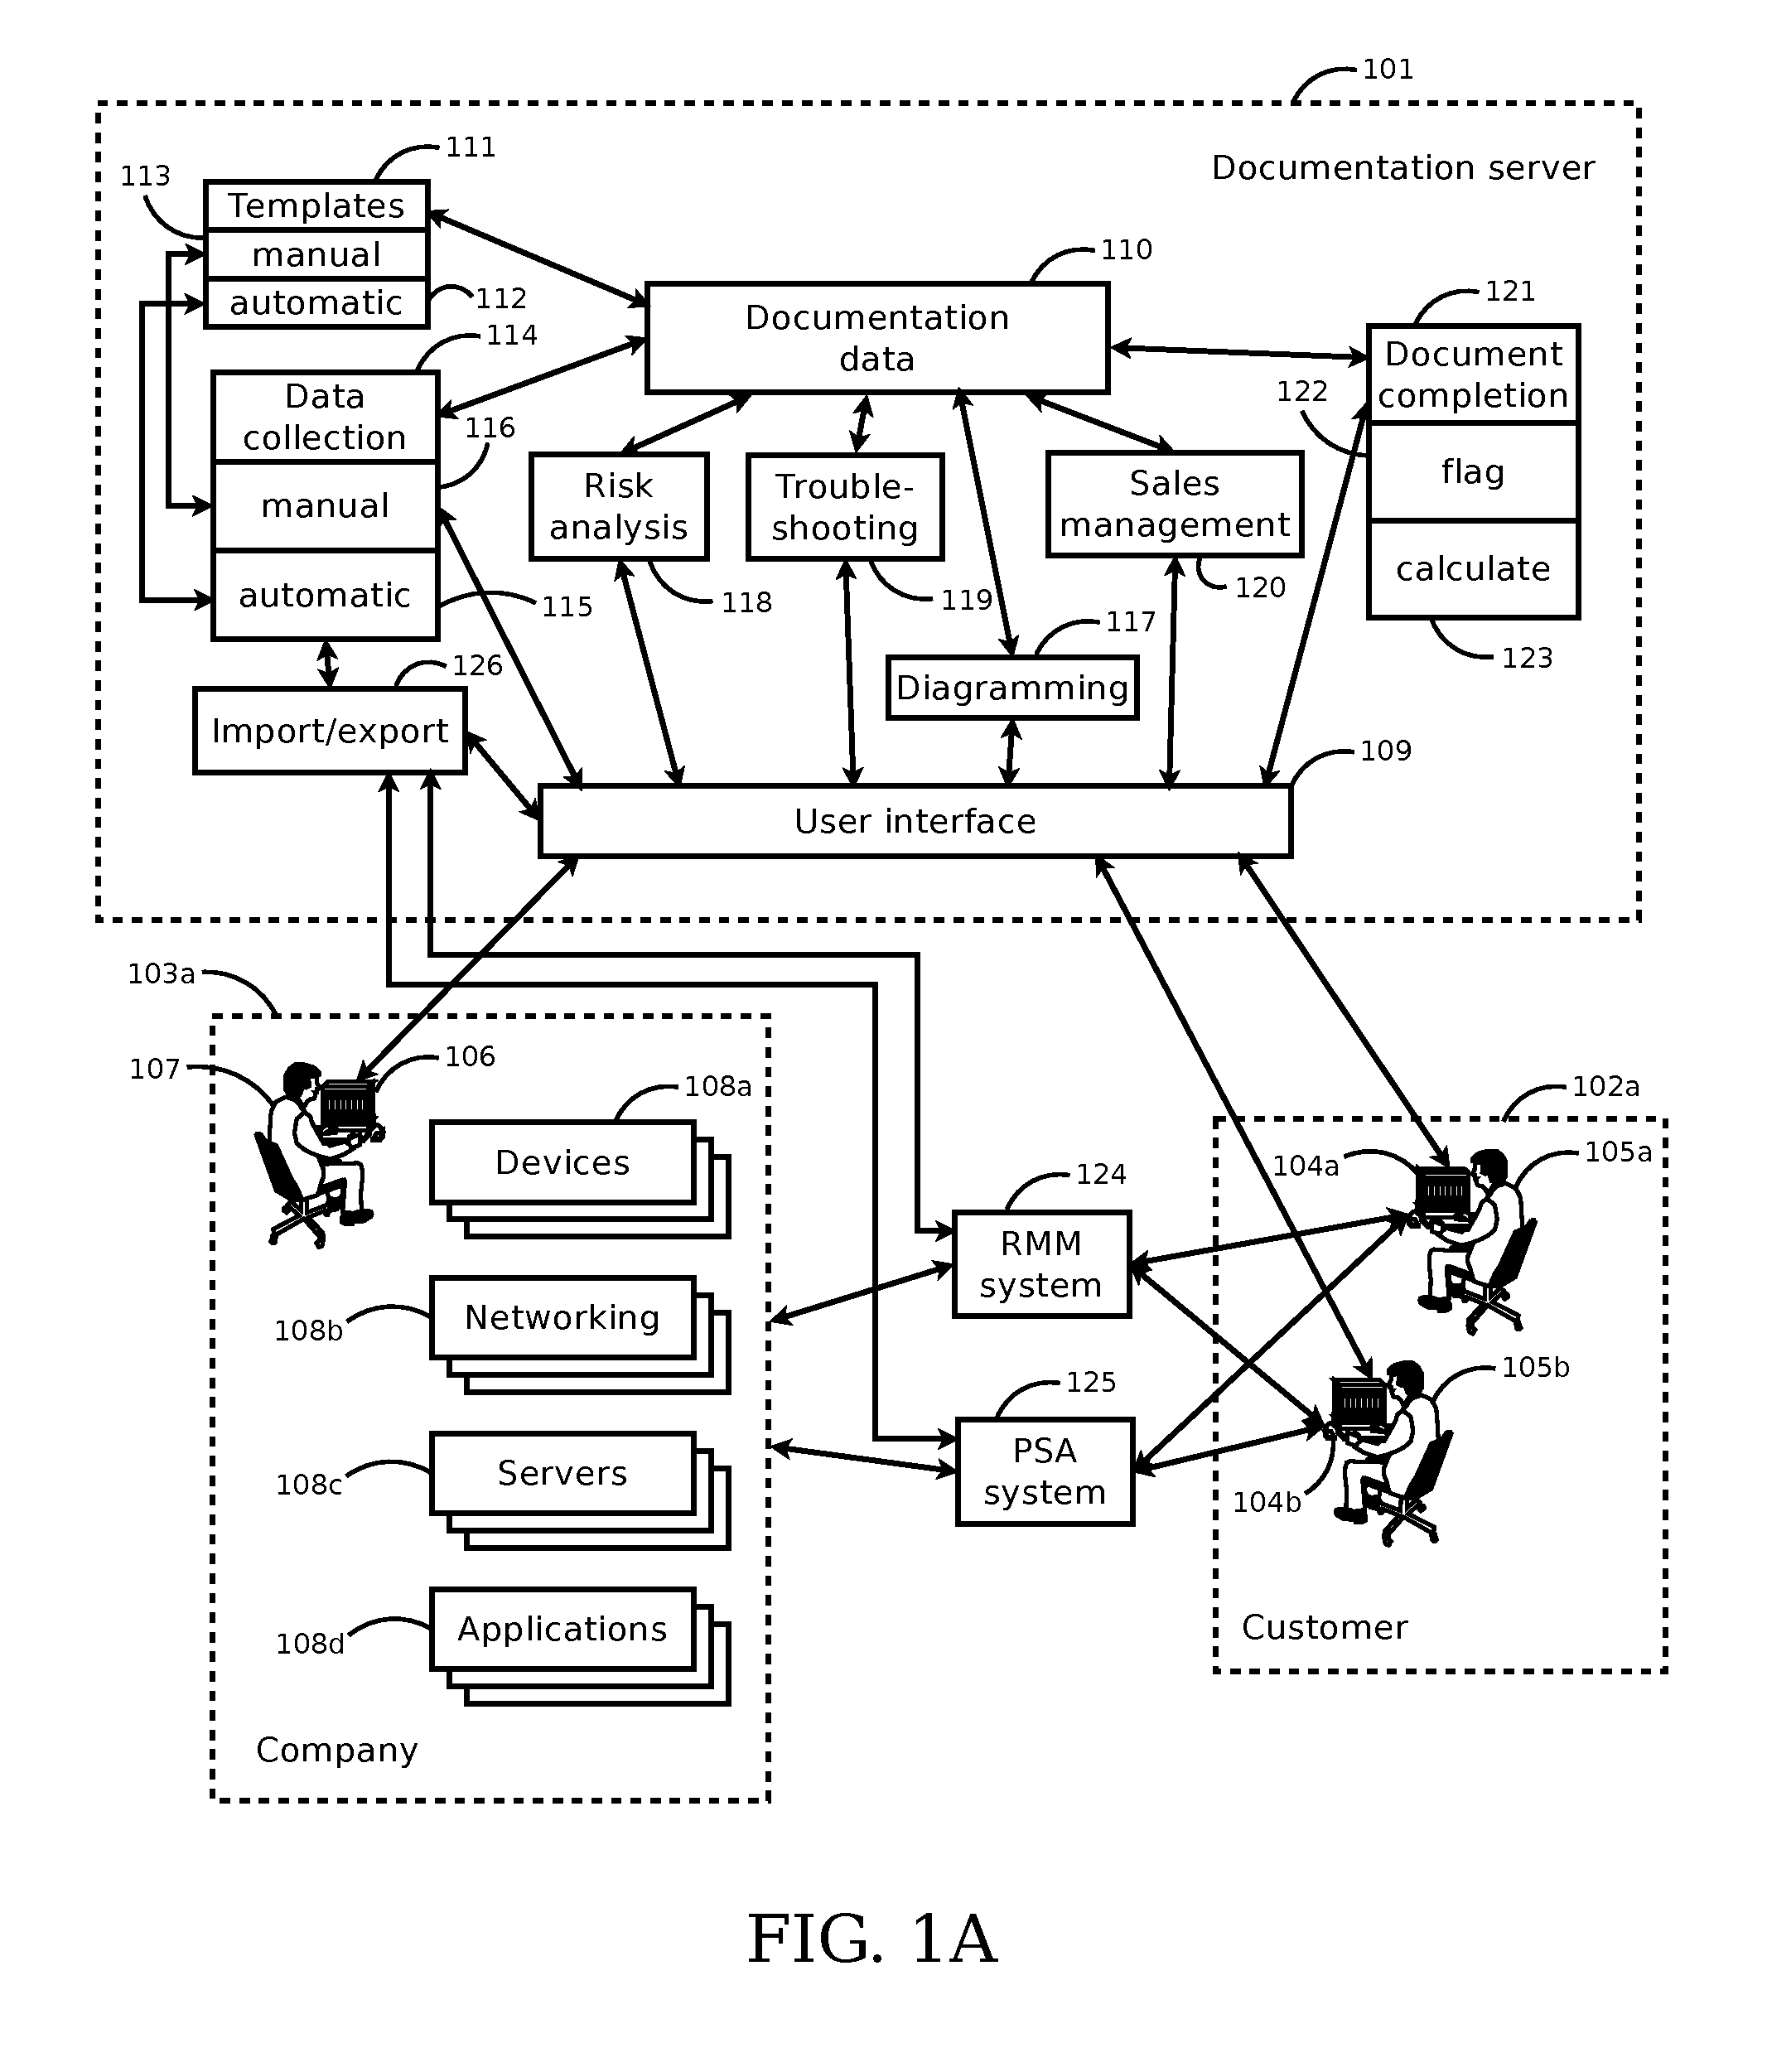 Systems and methods for documenting, analyzing, and supporting information technology infrastructure